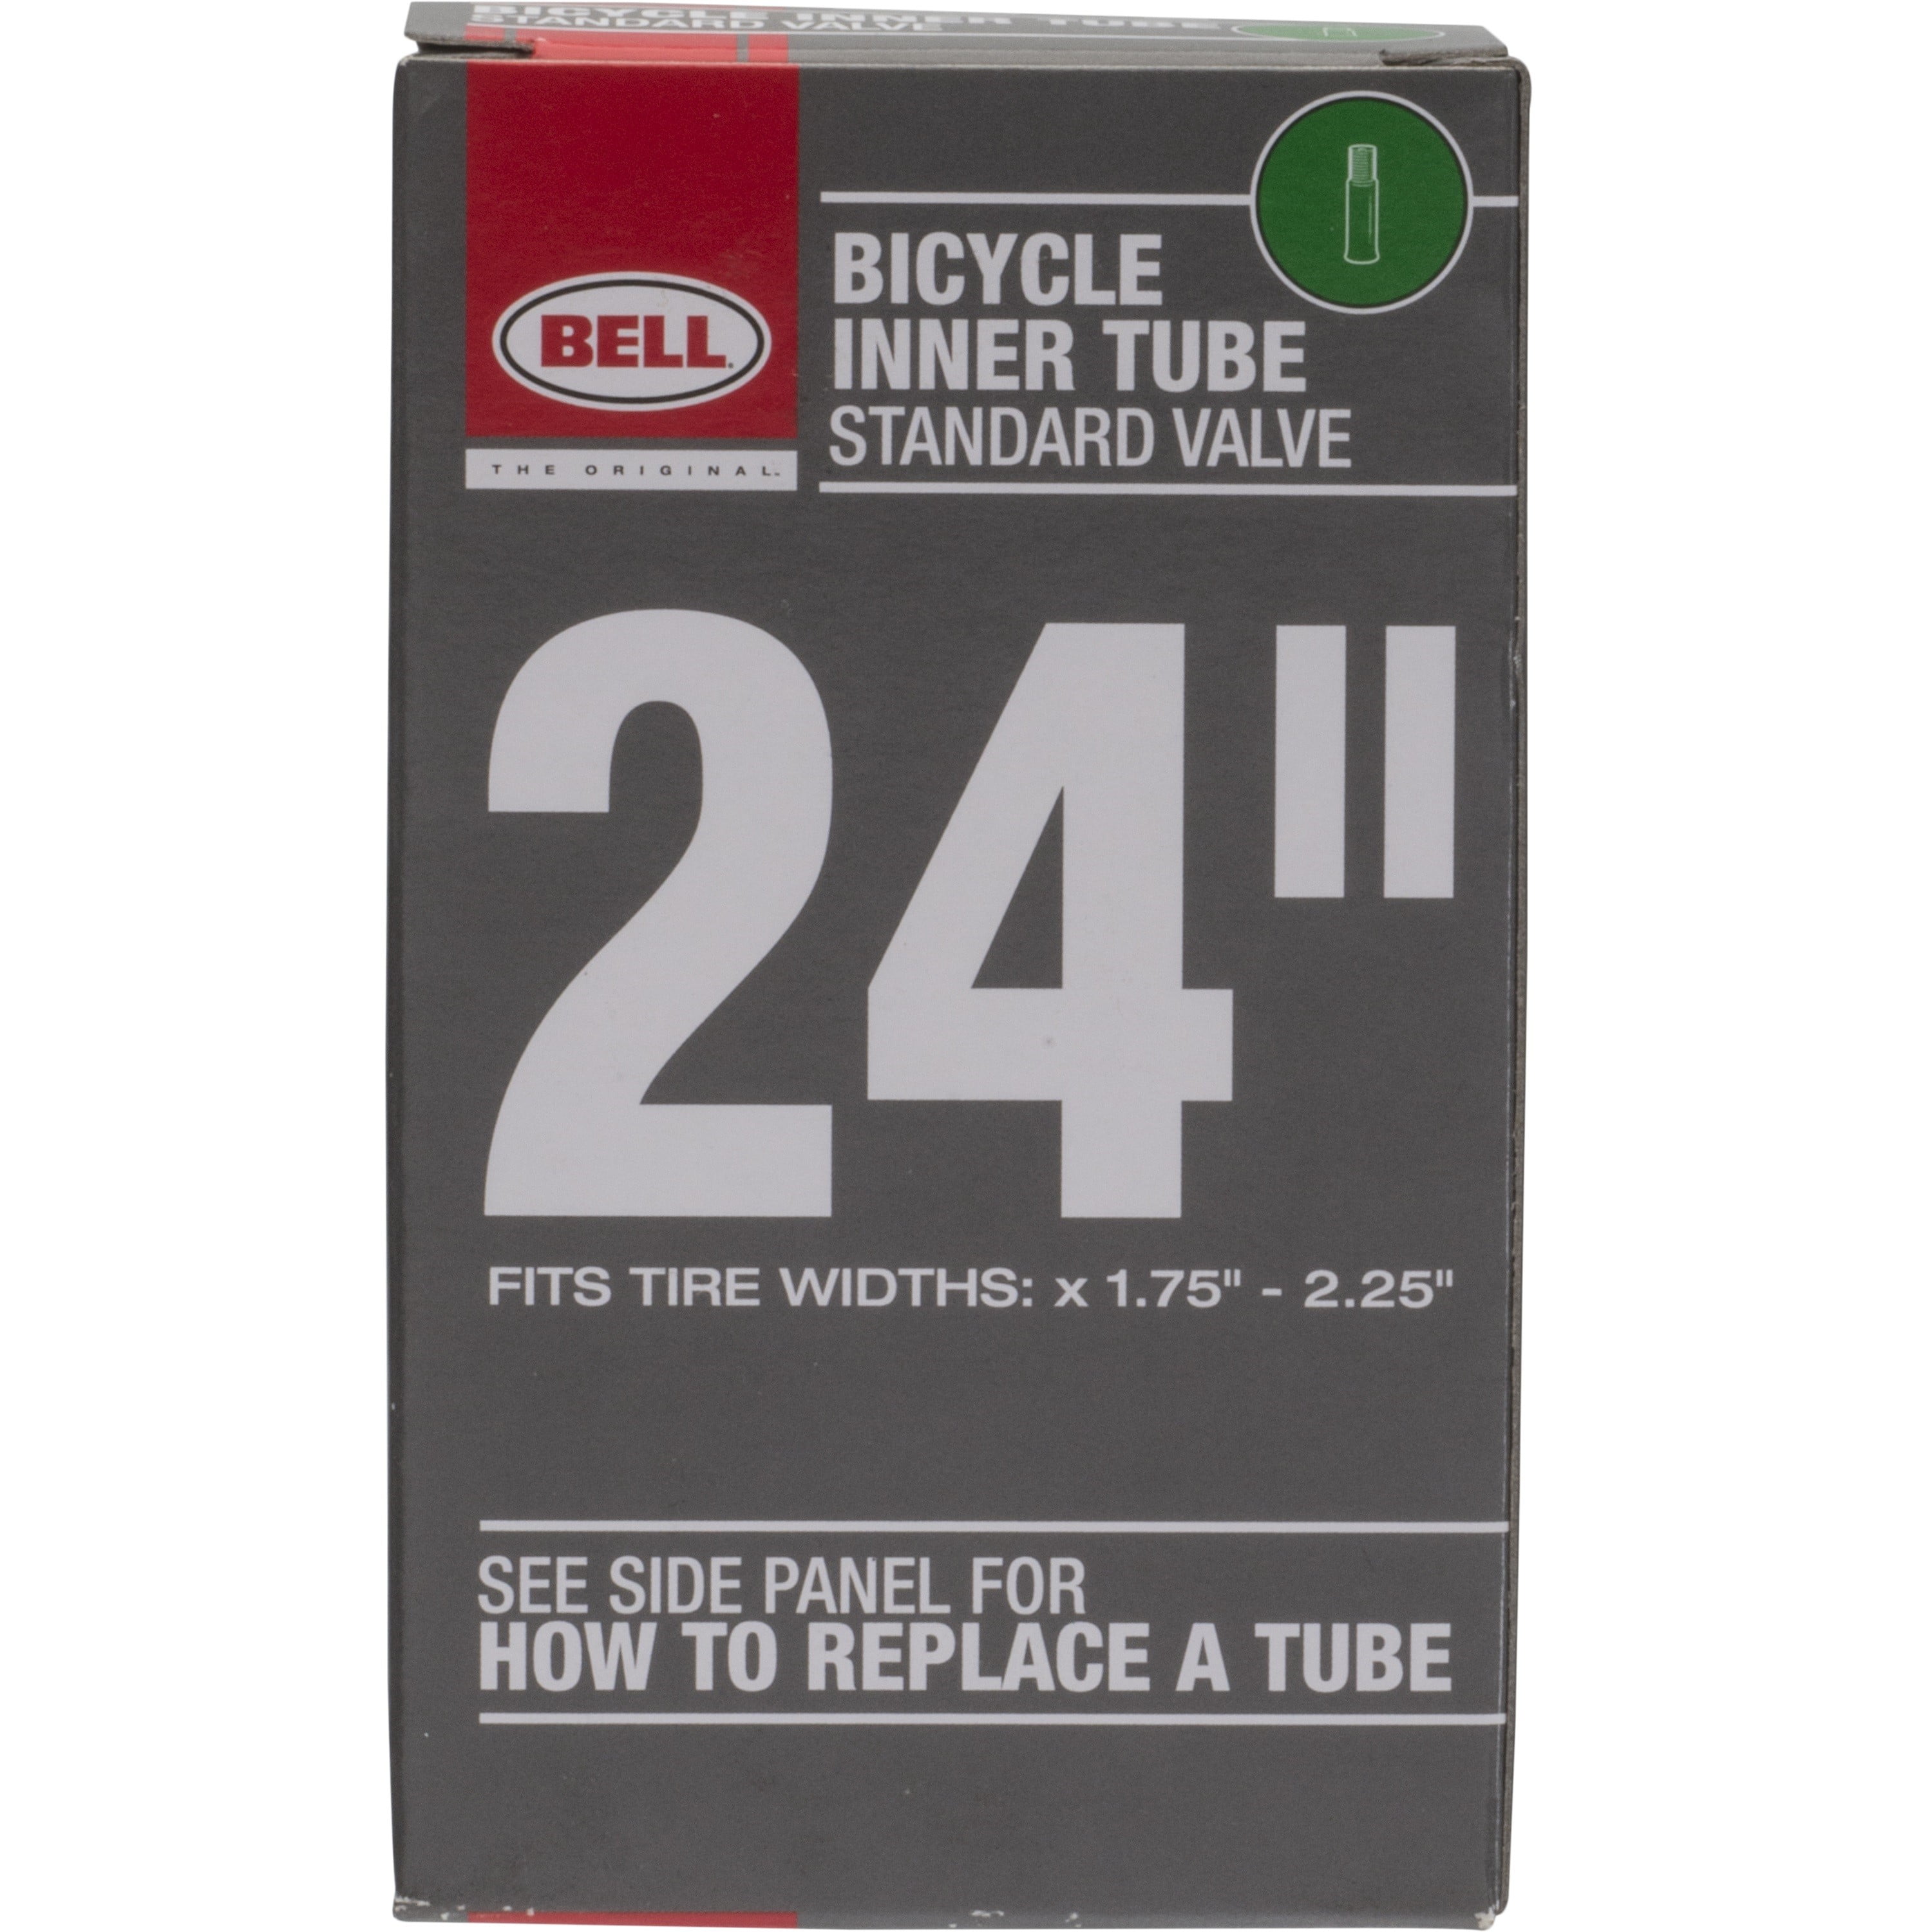 2x Bell Bicycle Inner Tube 24" Bike Tire Replacement With Standard Valve for sale online